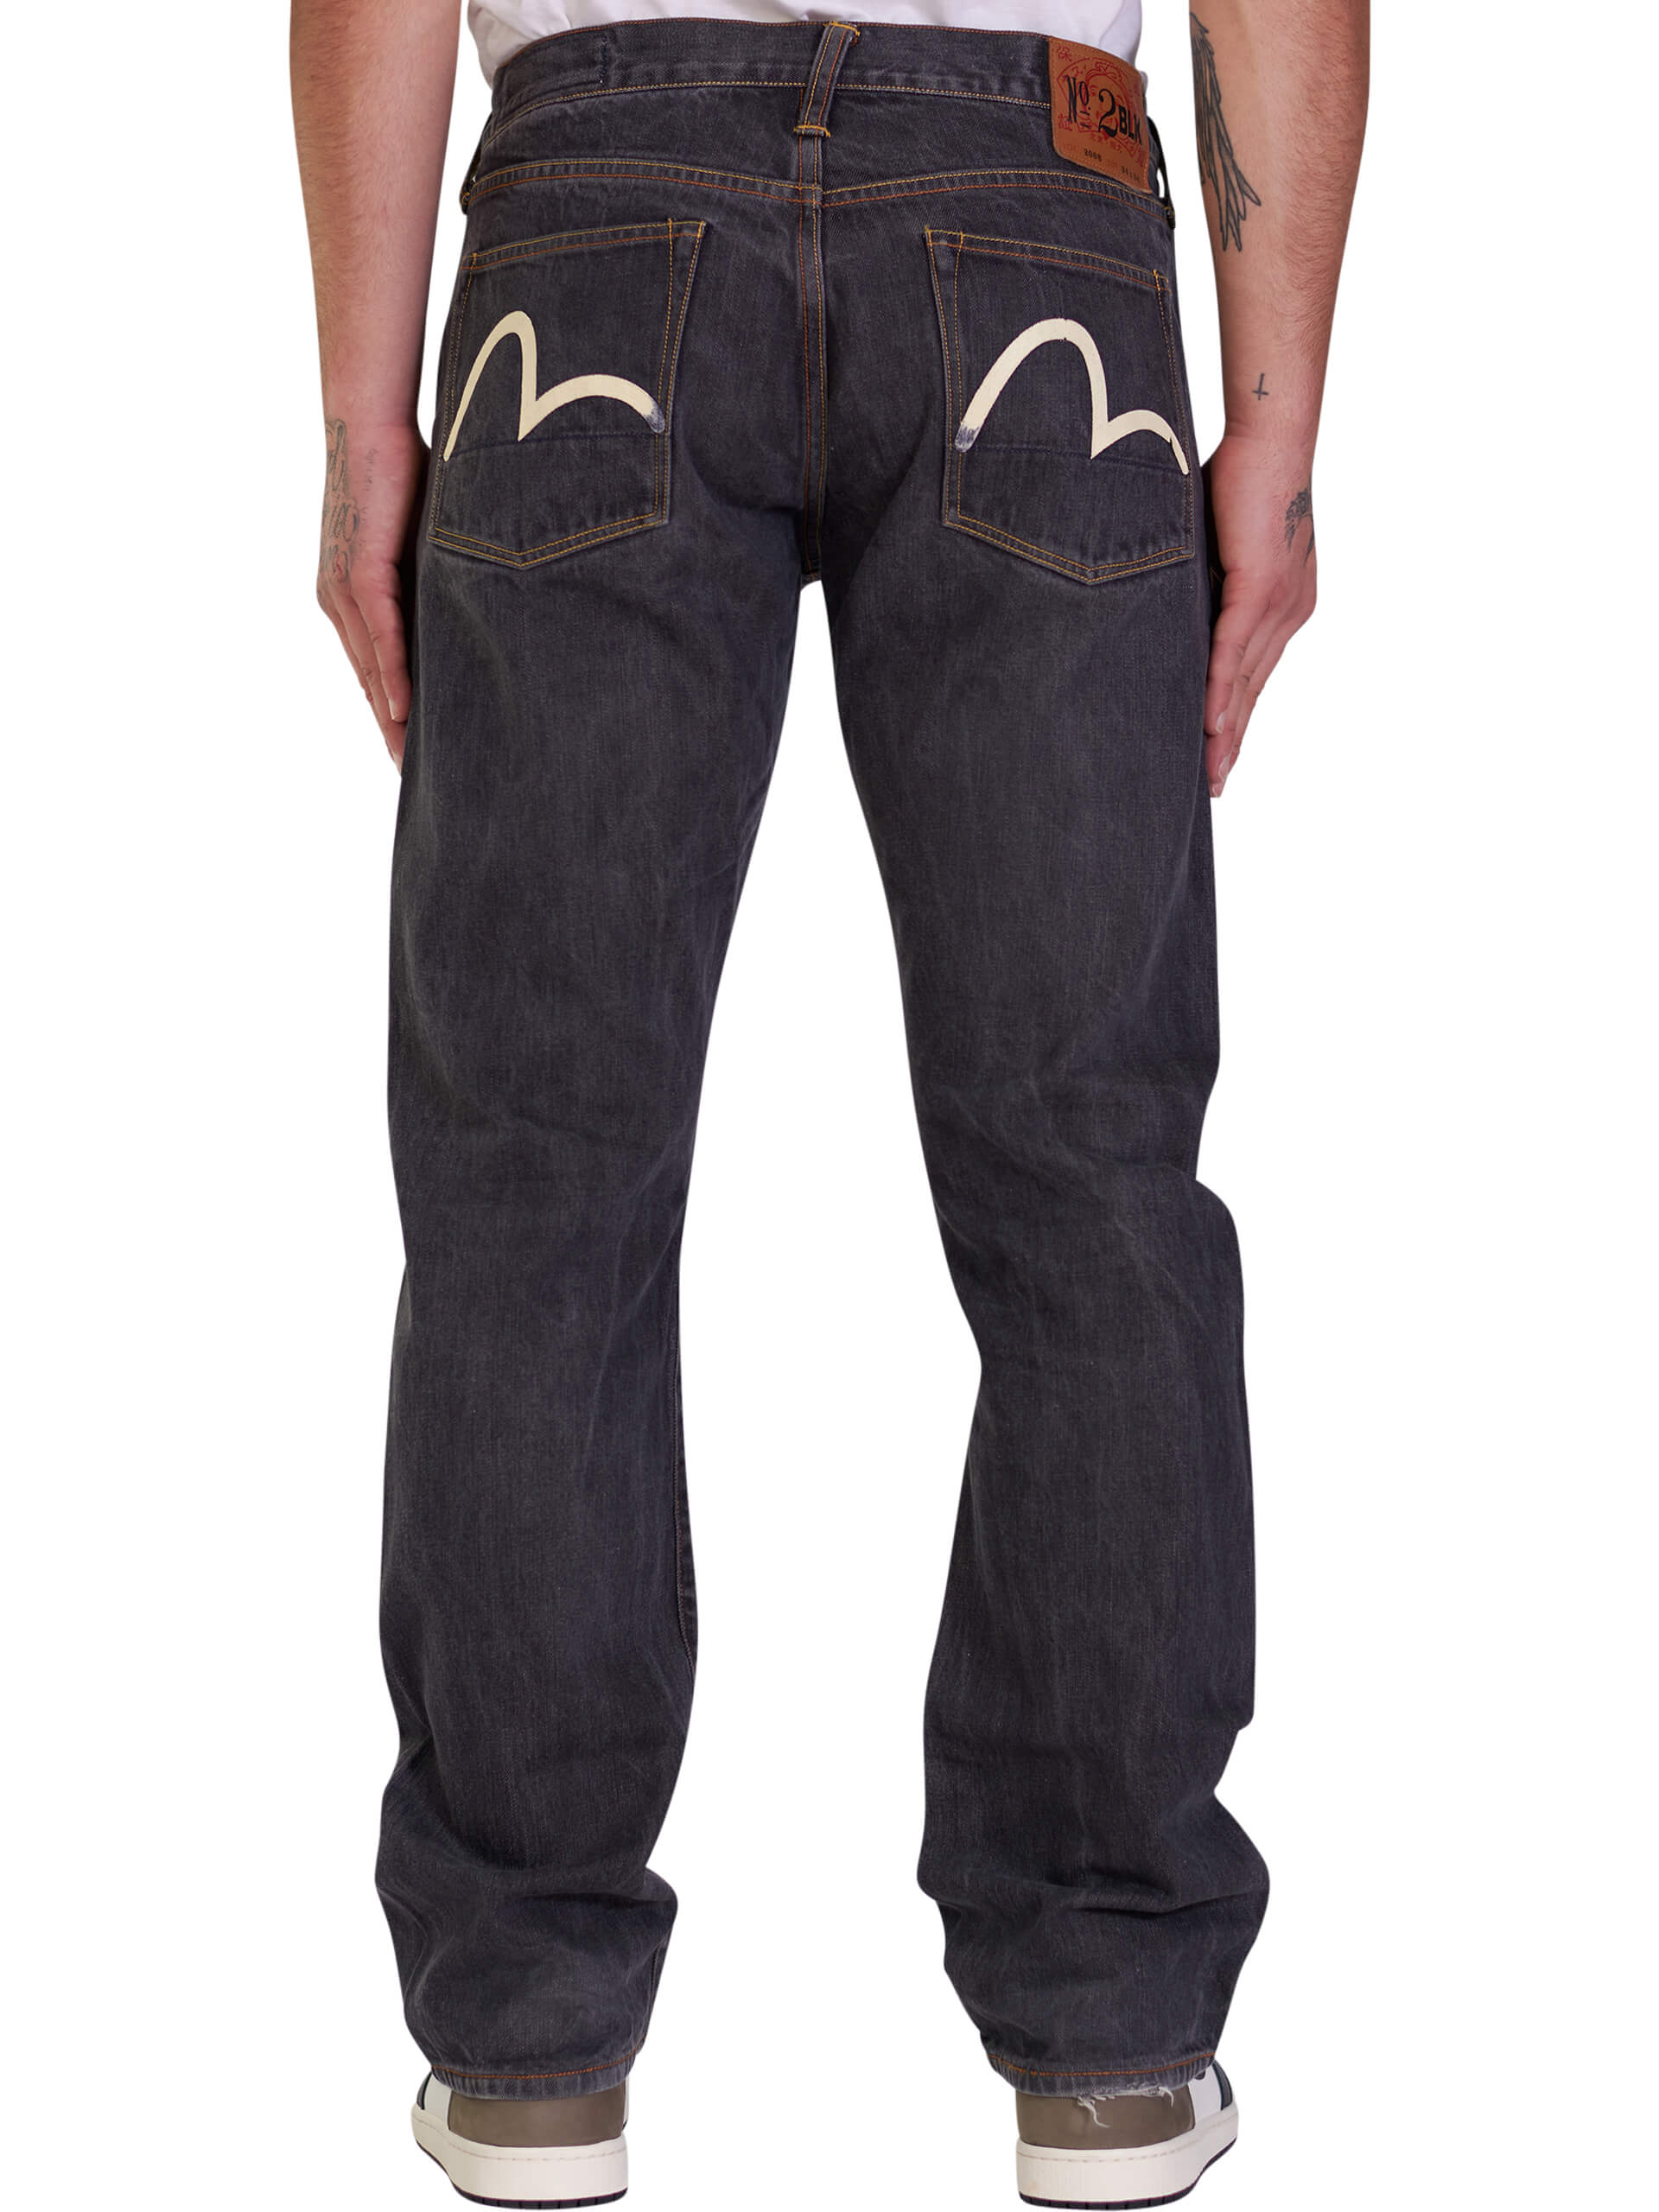 Seagull Jeans